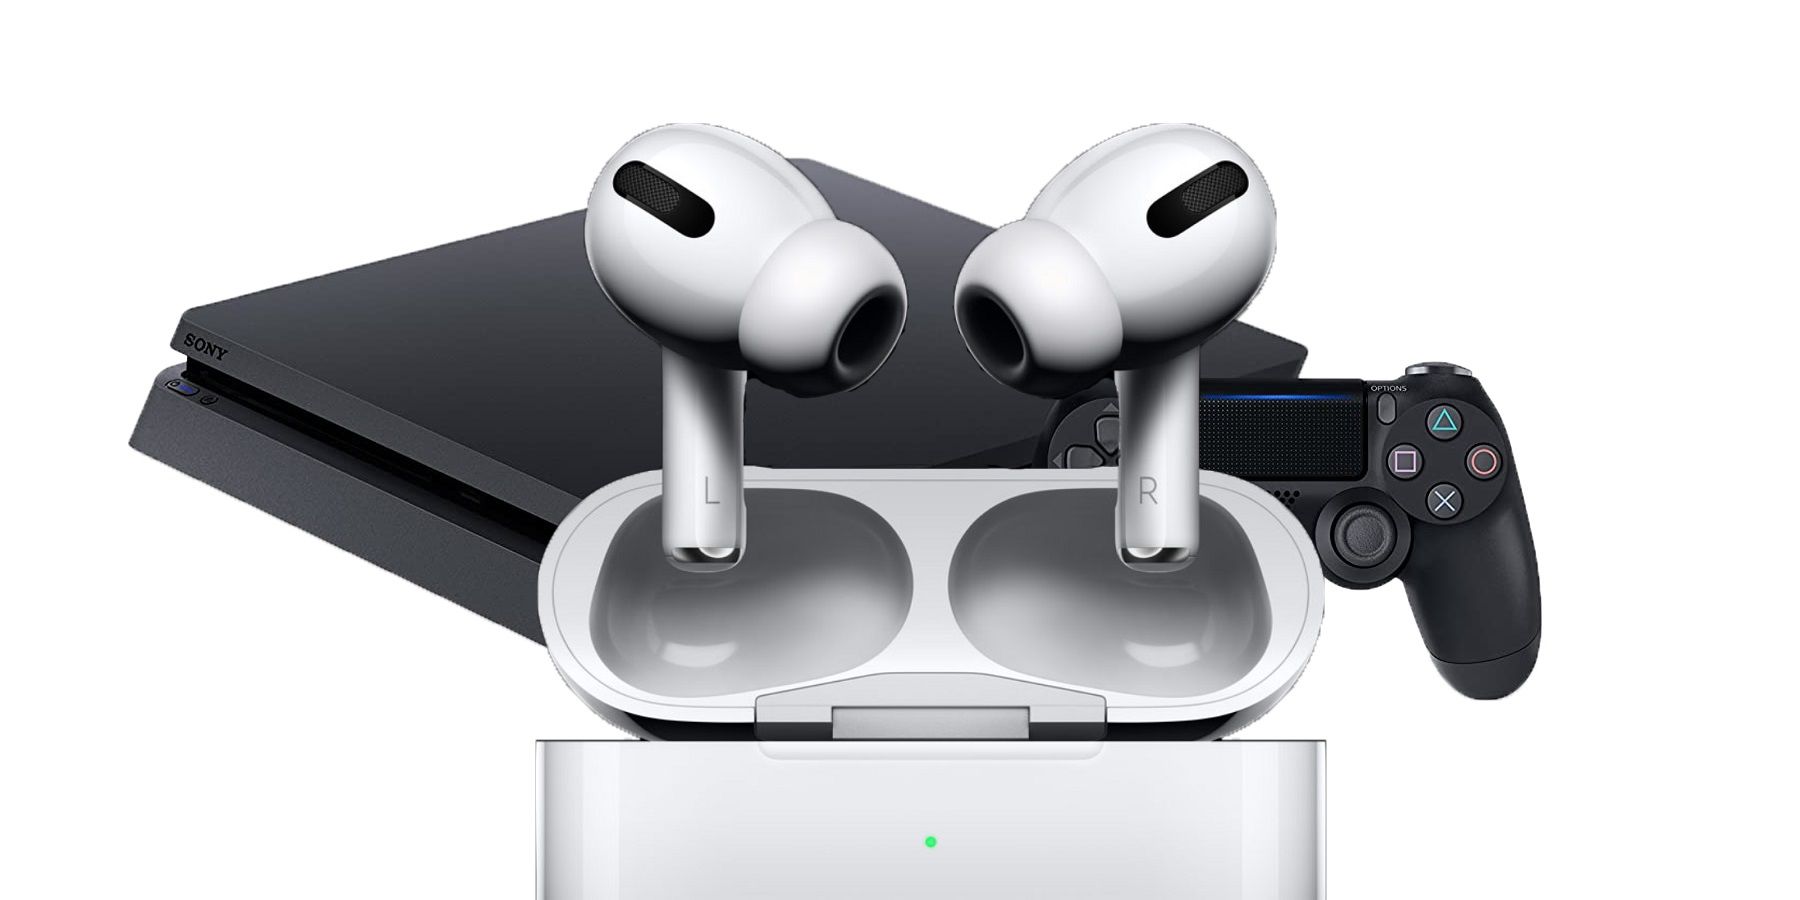 Frastøde segment Wings How To Use Apple AirPods With Sony's PlayStation 4